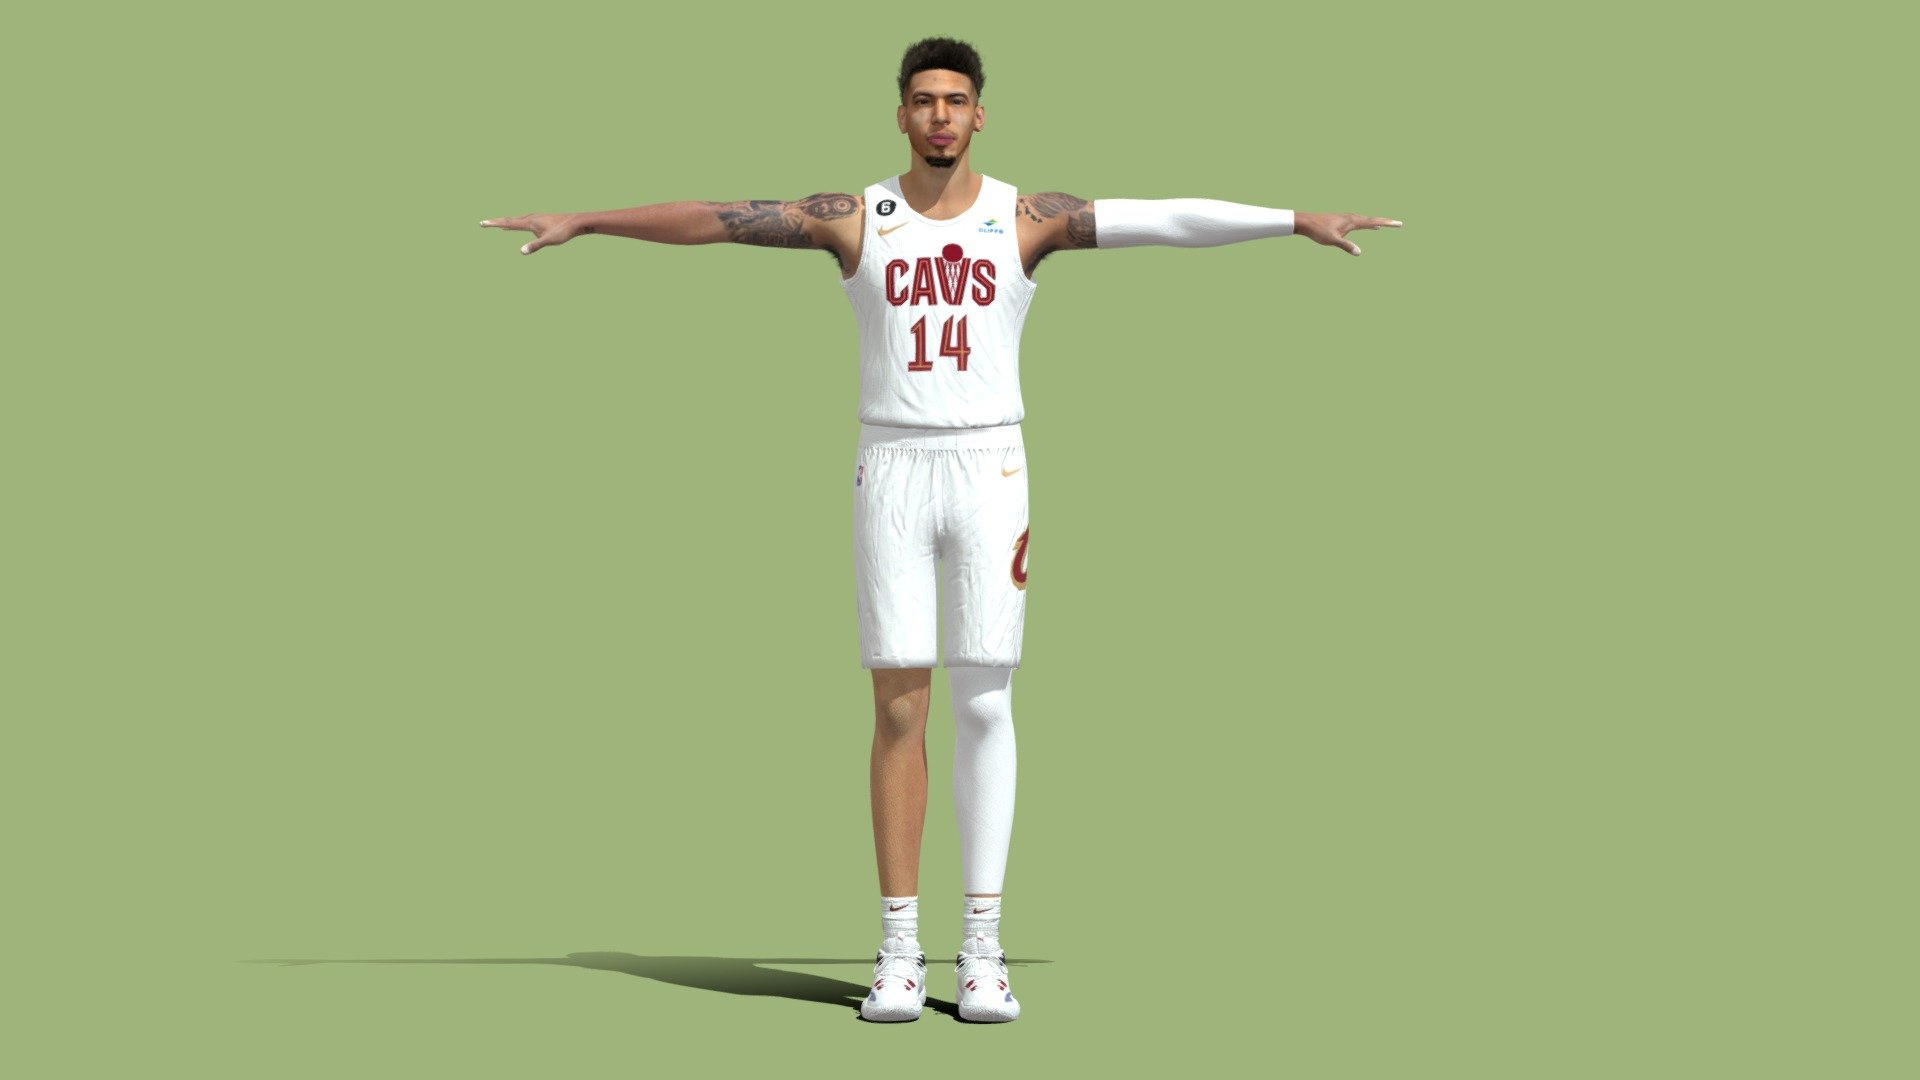 Youtube channel: https://www.youtube.com/@3dpassion3d/?sub_confirmation=1


For buy:

https://3dpassion.net/product/t-pose-rigged-danny-green-cavs-nba/

For contact:

** 3dpassion3d@gmail.com**

telegram: @passion3d
Model’s created by 3dsmax, export to FBX file. 

Very simple to import FBX file into C4D, Blender, Maya, Sketchup…

Format





3DSMax 2016 standard materials




Fbx




Obj




C4D r19




Blender 2.91




Maya 2018




Gltf 2.0




Glb 2.0


 - T-Pose Rigged Danny Green Cavs NBA - 3D model by 3dpassion.net 3d model